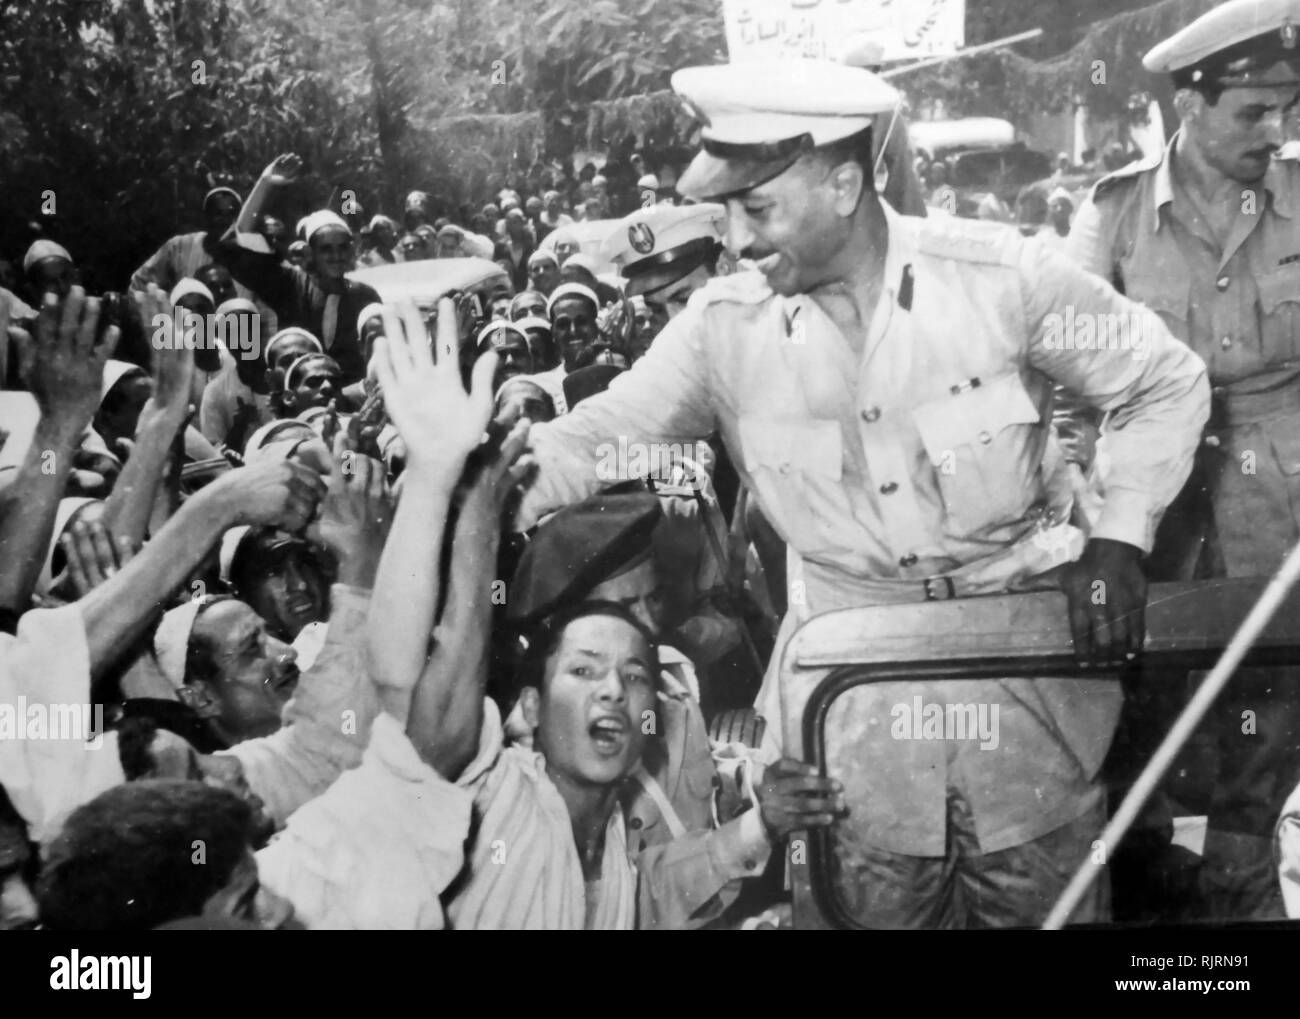 Free officers leaders including Anwar Sadat are mobbed by crowds during the 1952 Egyptian Revolution. Muhammad Anwar el-Sadat (1918 - 1981), President of Egypt, serving from 15 October 1970 until his assassination by fundamentalist army officers on 6 October 1981. Sadat was a senior member of the Free Officers who overthrew King Farouk in the Egyptian Revolution of 1952, and a close confidant of President Gamal Abdel Nasser, under whom he served as Vice President twice and whom he succeeded as President in 1970. Stock Photo